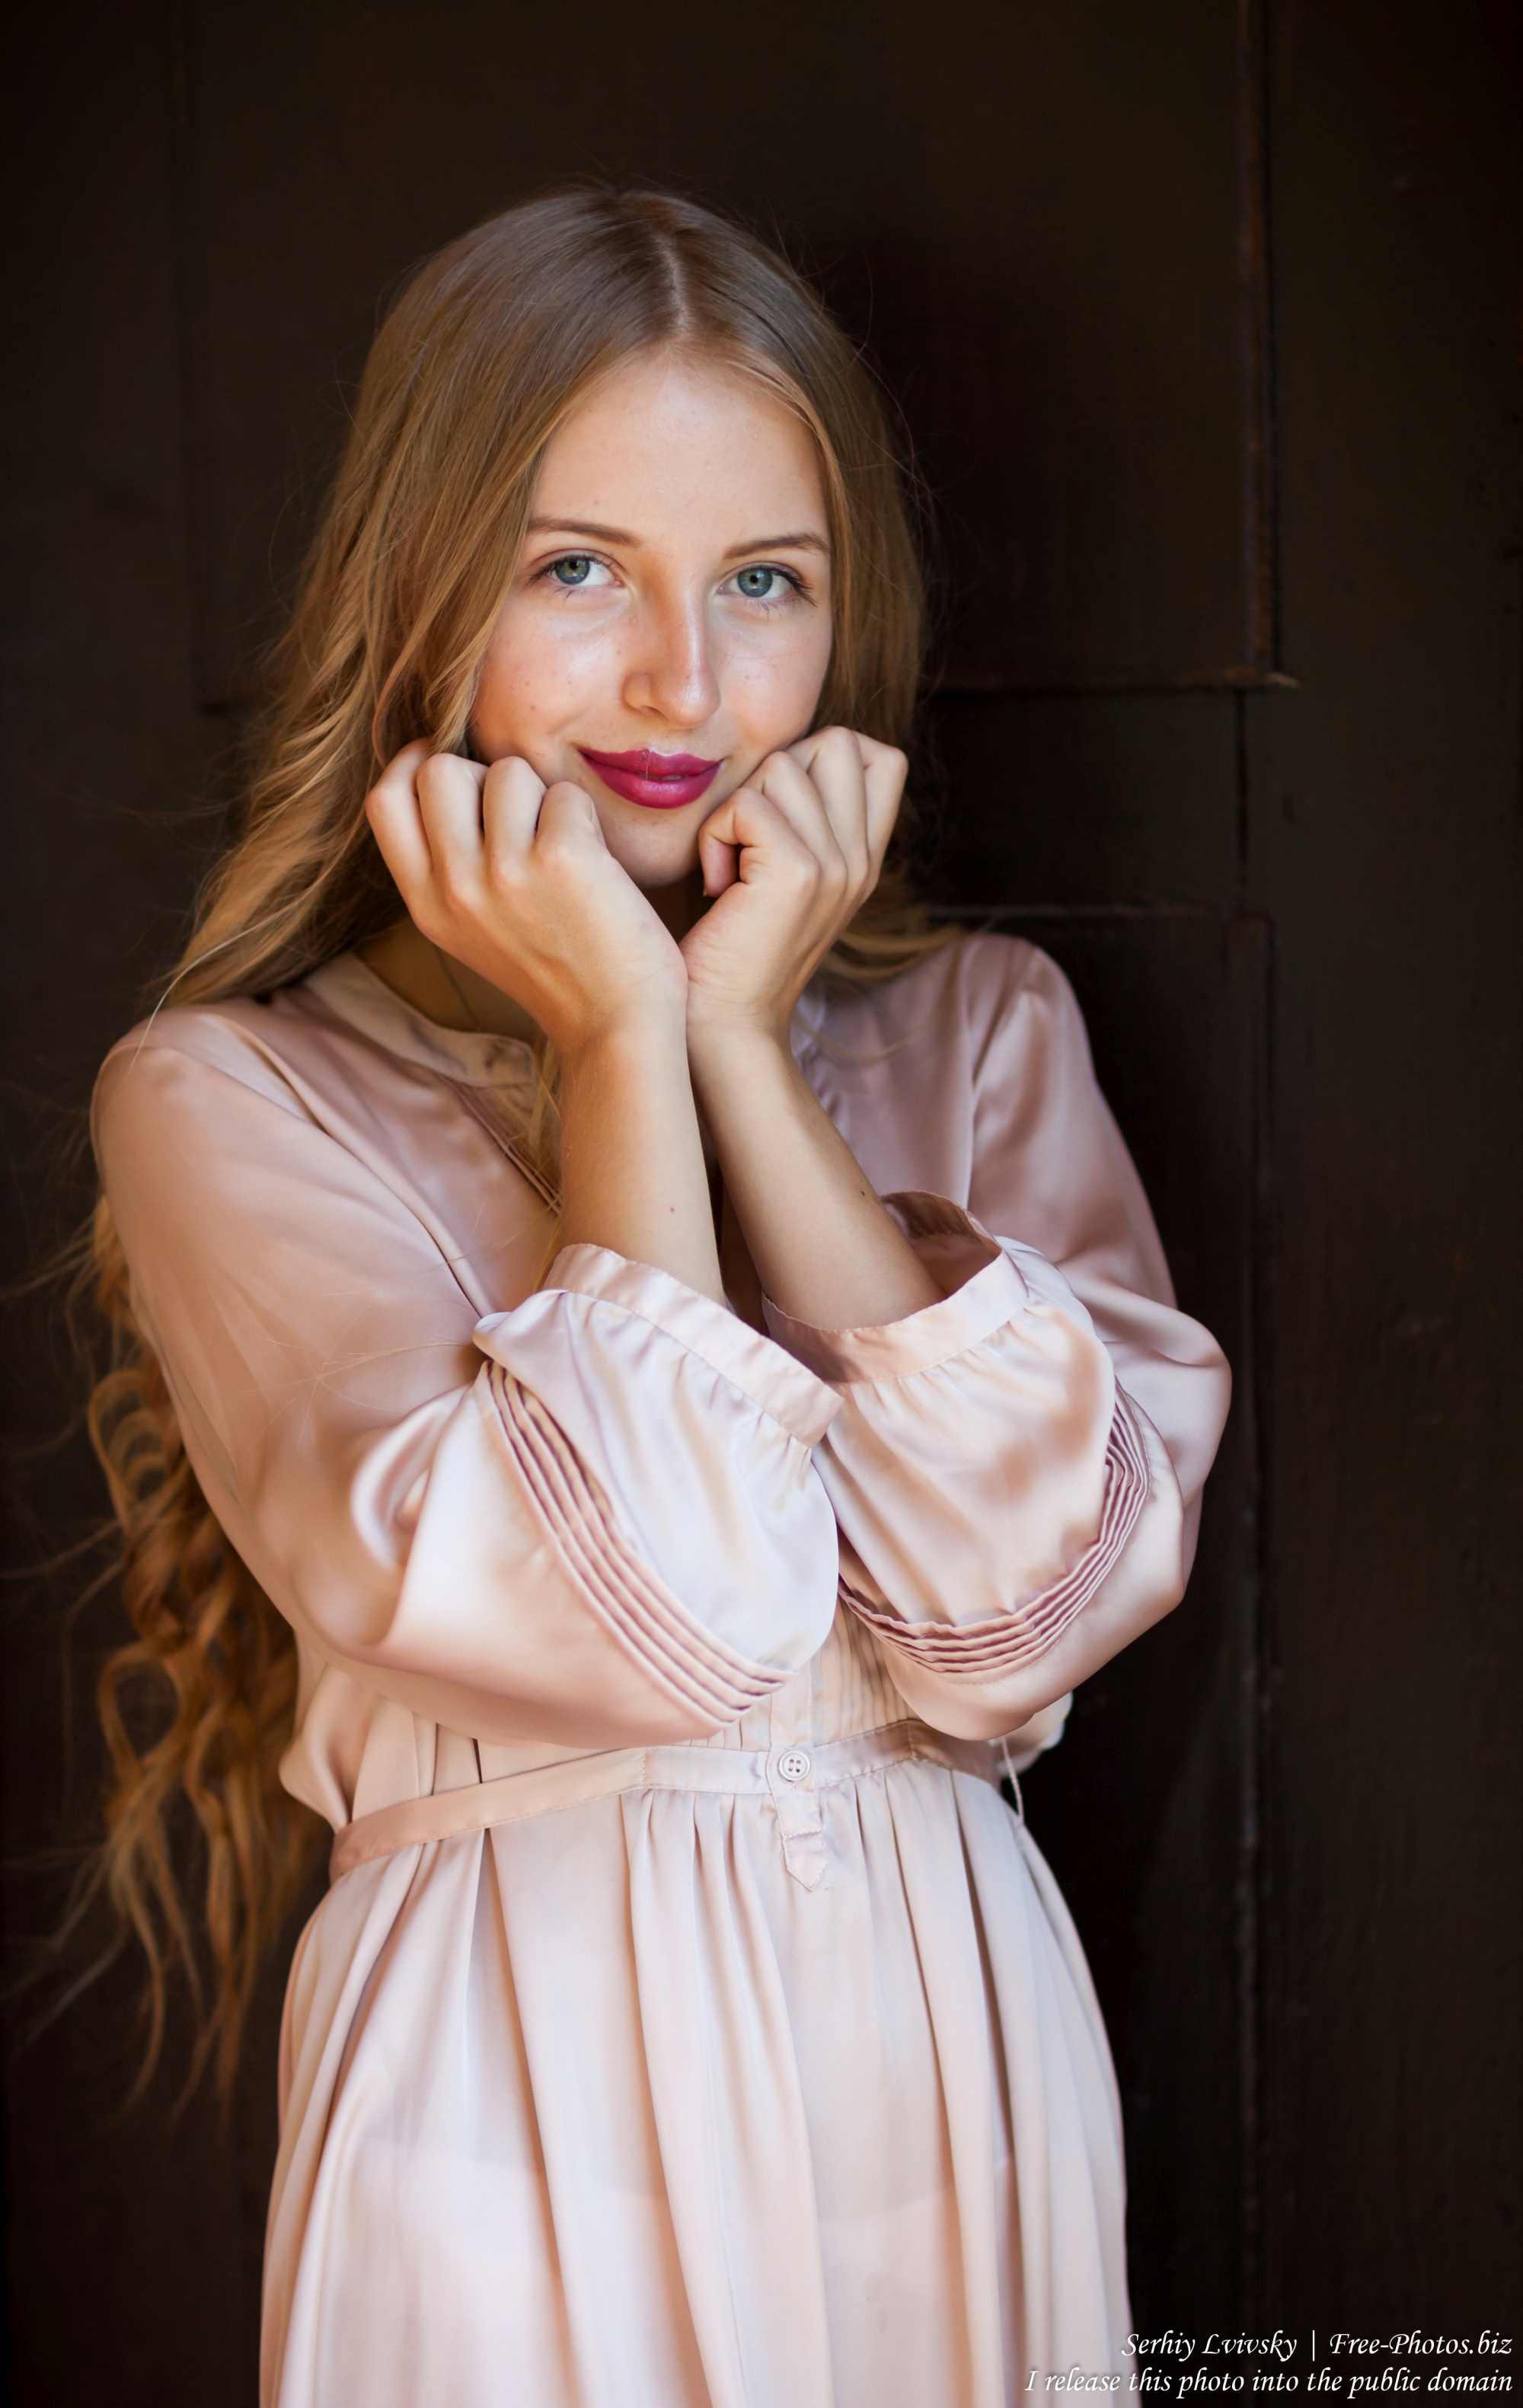 ania_a_14-year-old_natural_blonde_girl_photographed_by_serhiy_lvivsky_in_august_2017_17.jpg